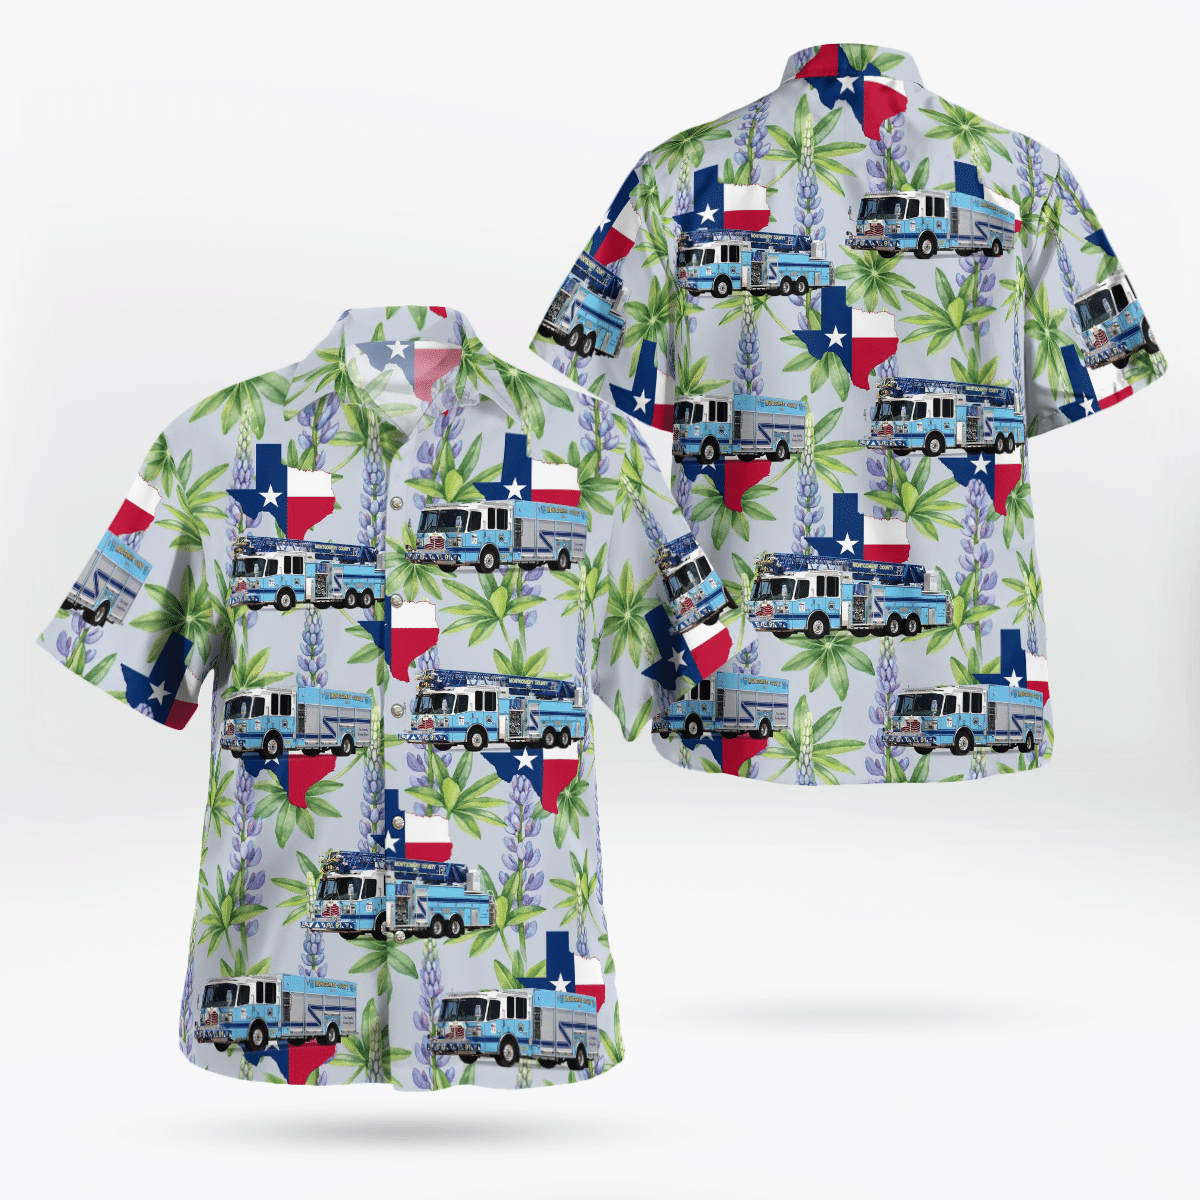 HOT Willis, Texas, Montgomery County ESD 1 Station 91 Willis Tropical Shirt1